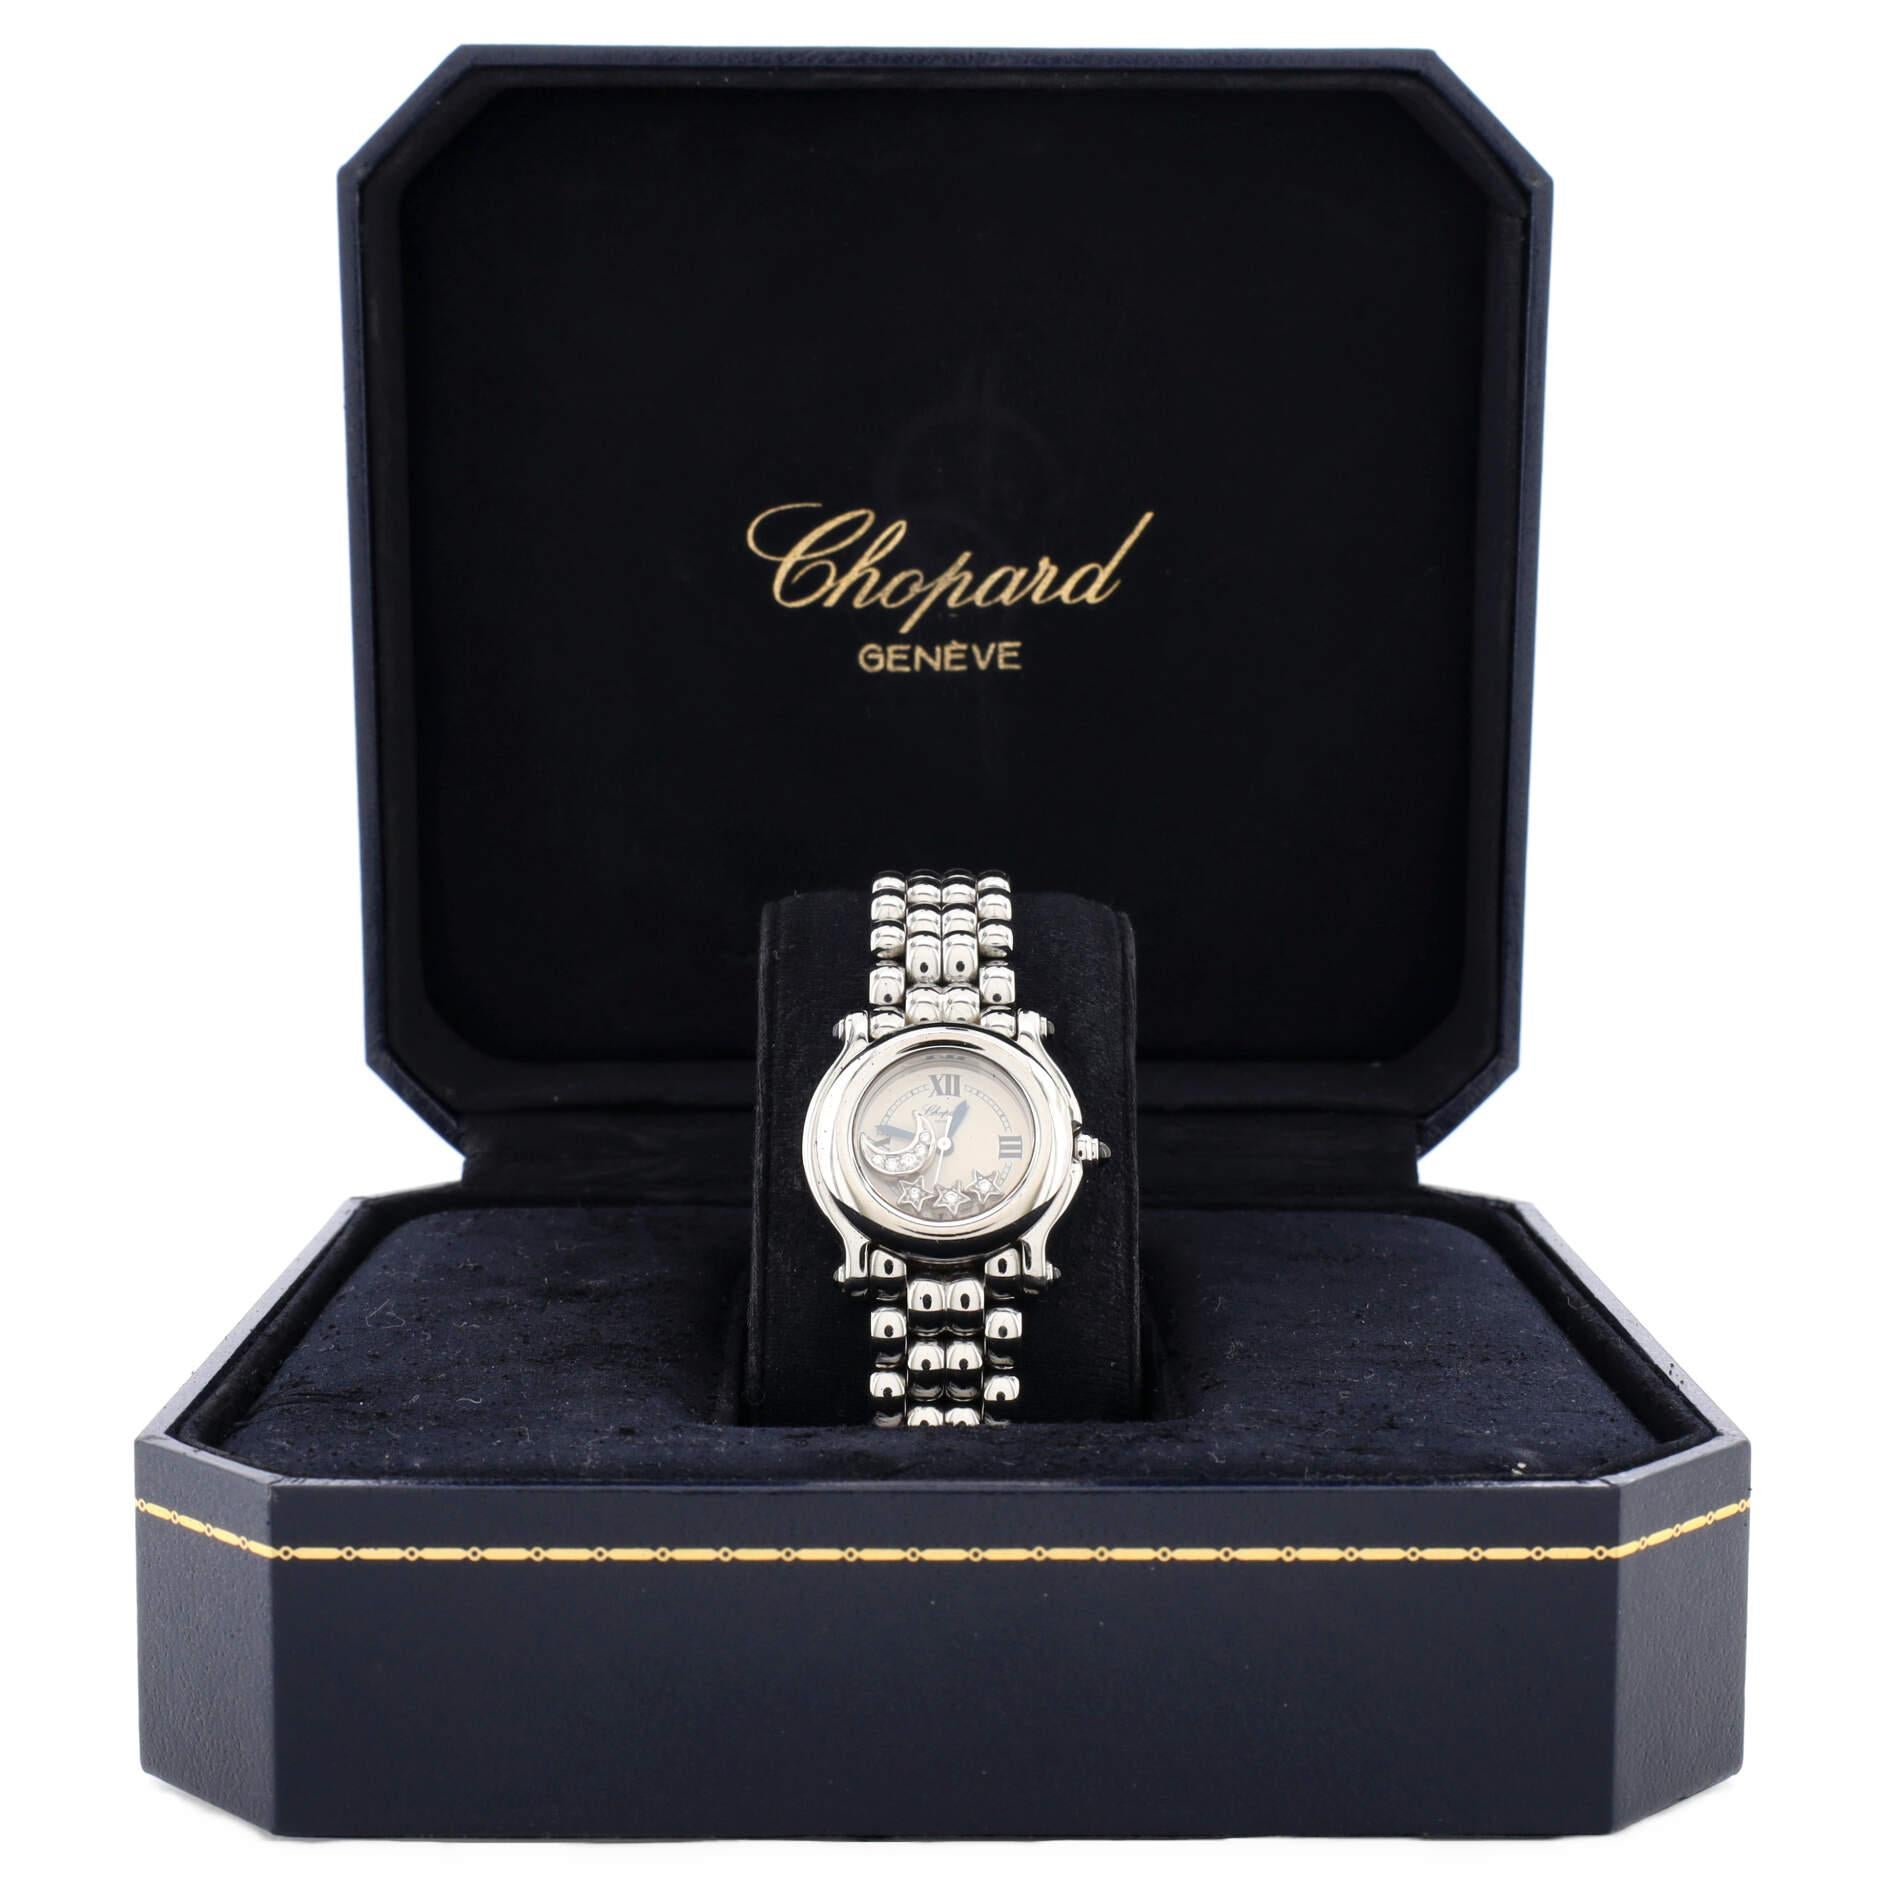 Condition: Very good. Moderate scratches and wear throughout. Wear and scratches on case and bracelet.
Accessories: Box, Warranty Card - Undated
Measurements: Case Size/Width: 27mm, Watch Height: 8mm, Band Width: 14mm, Wrist circumference: